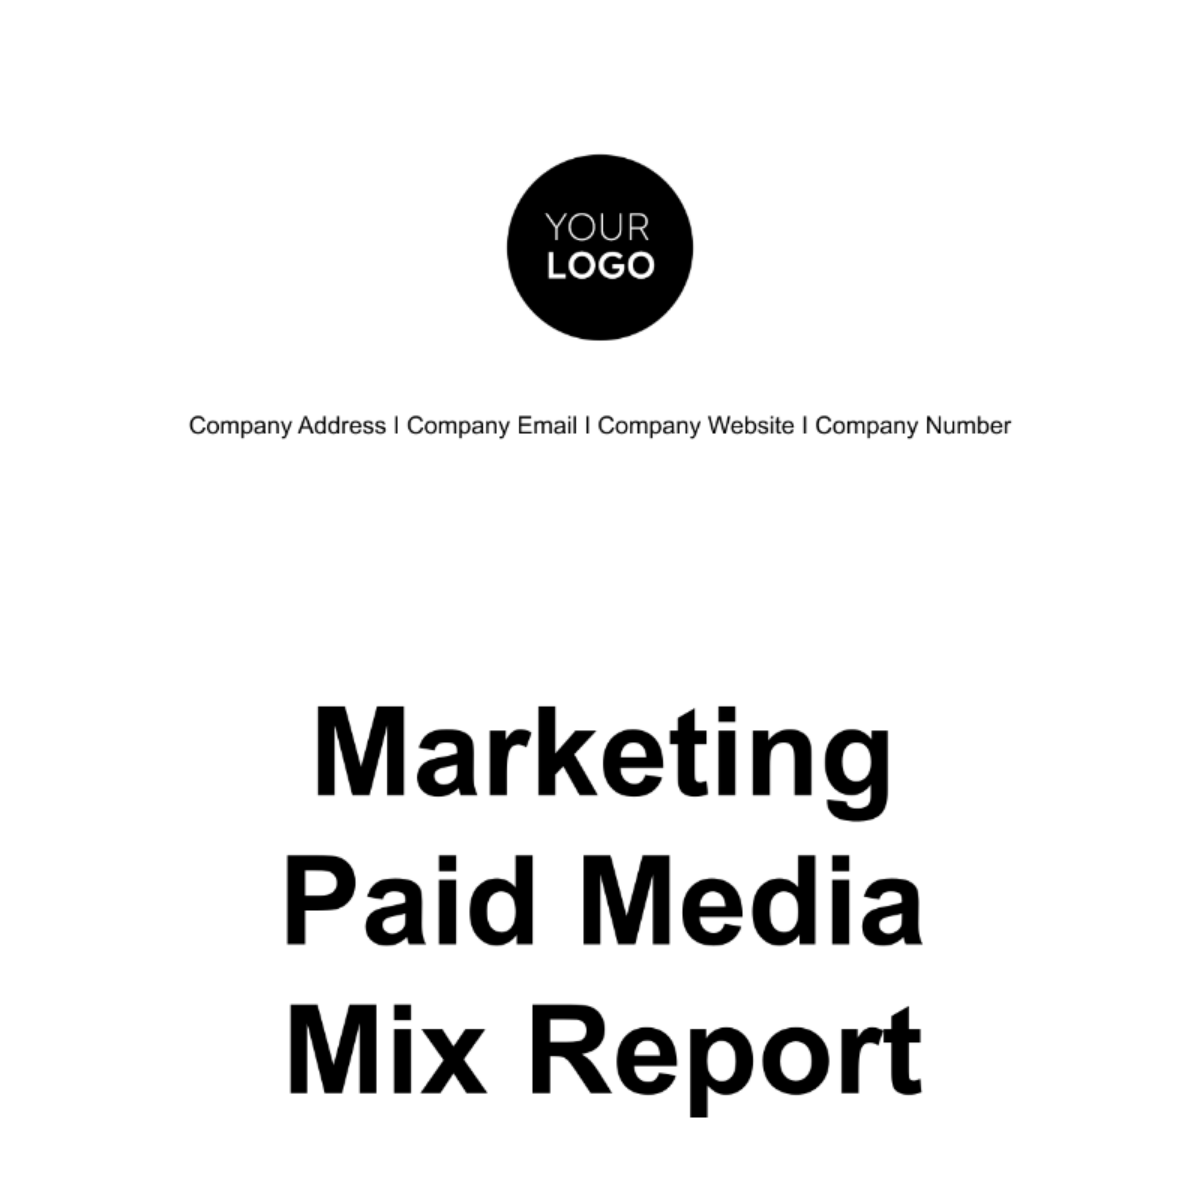 Free Marketing Paid Media Mix Report Template